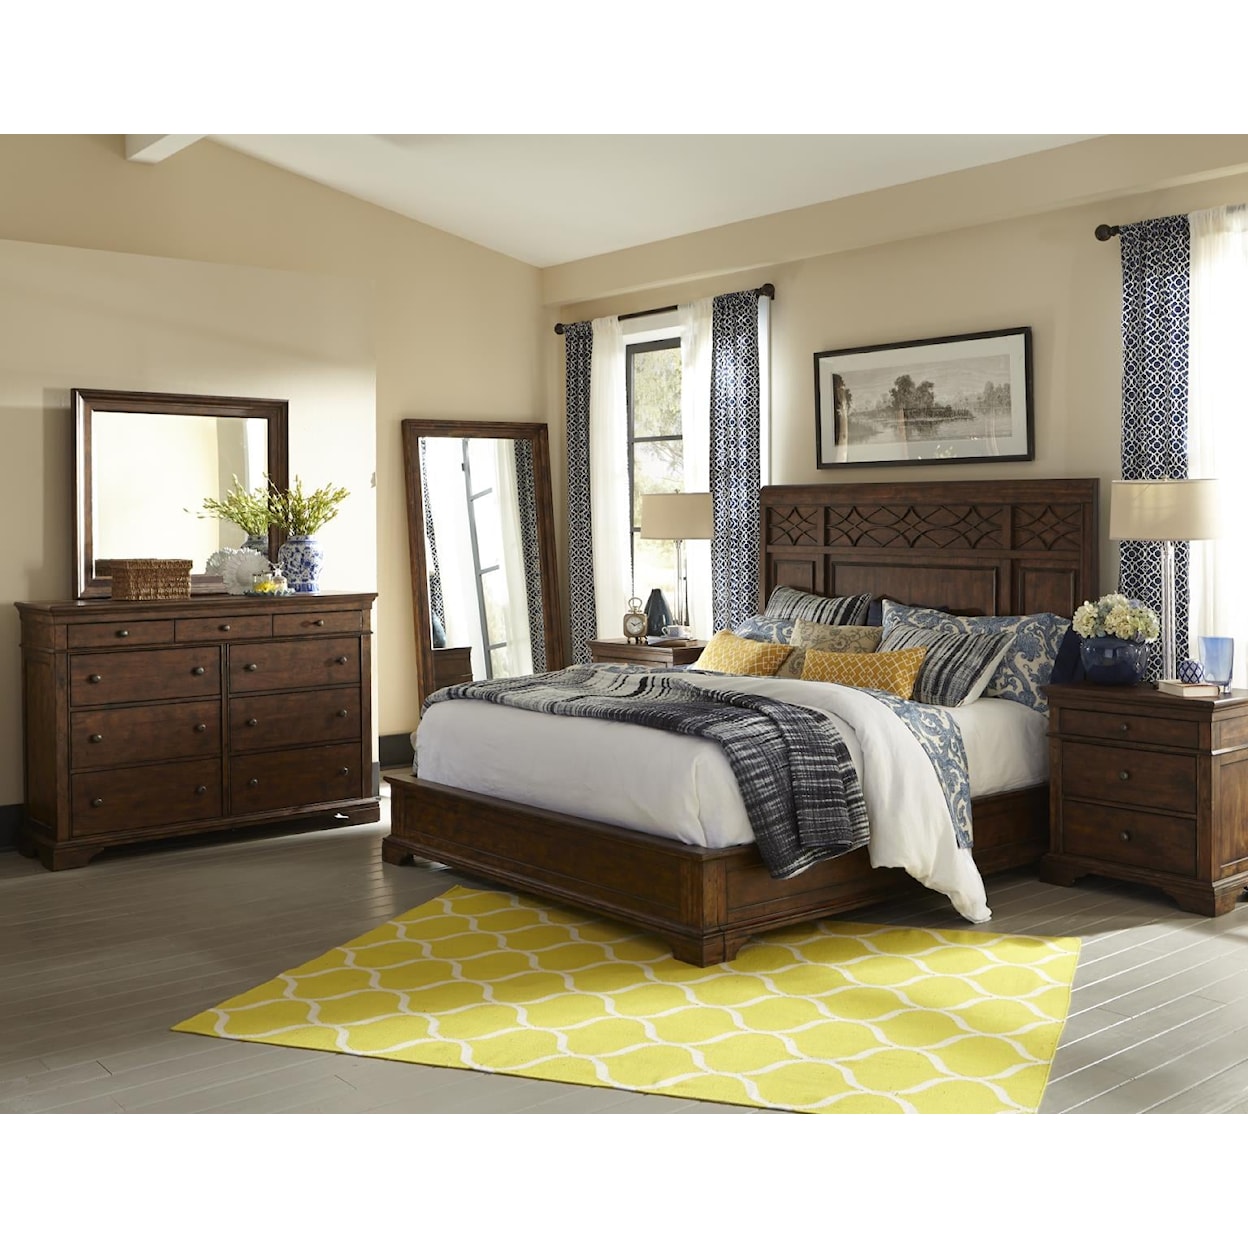 Trisha Yearwood Home Collection by Legacy Classic Trisha Yearwood Home Accent Chest 3 Drawers